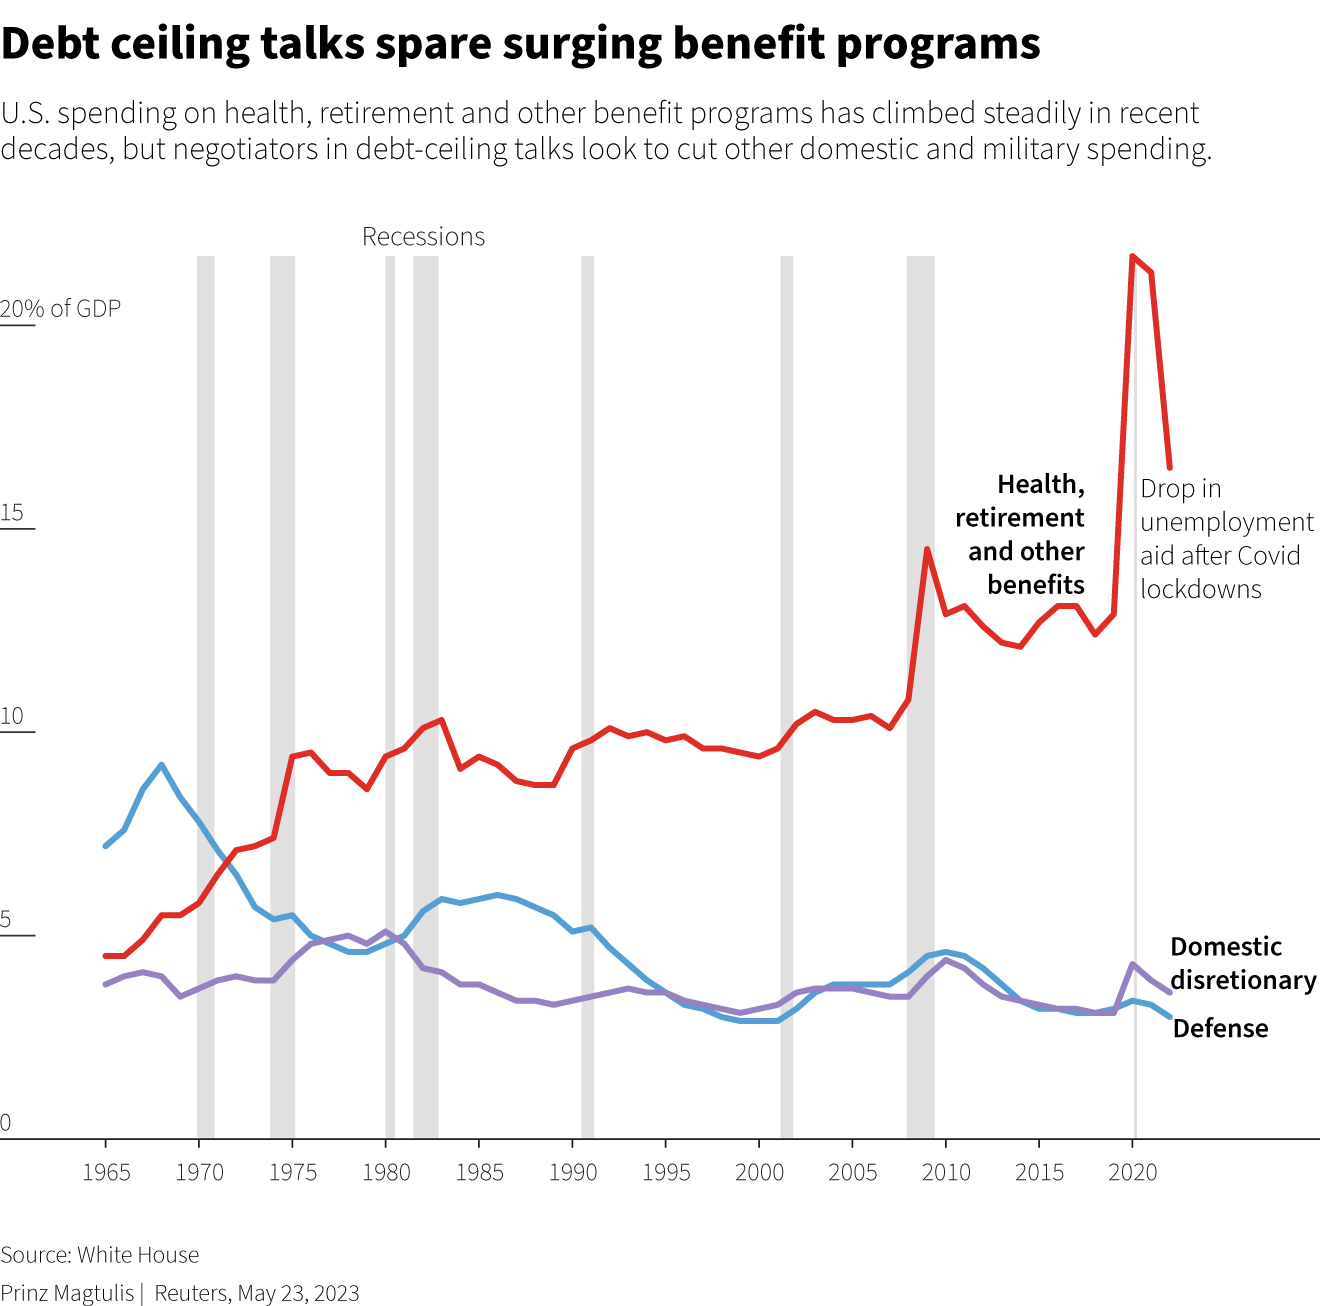 U.S. spending on health, retirement and other benefit programs has climbed steadily in recent decades, but negotiators in debt-ceiling talks look to cut other domestic and military spending.